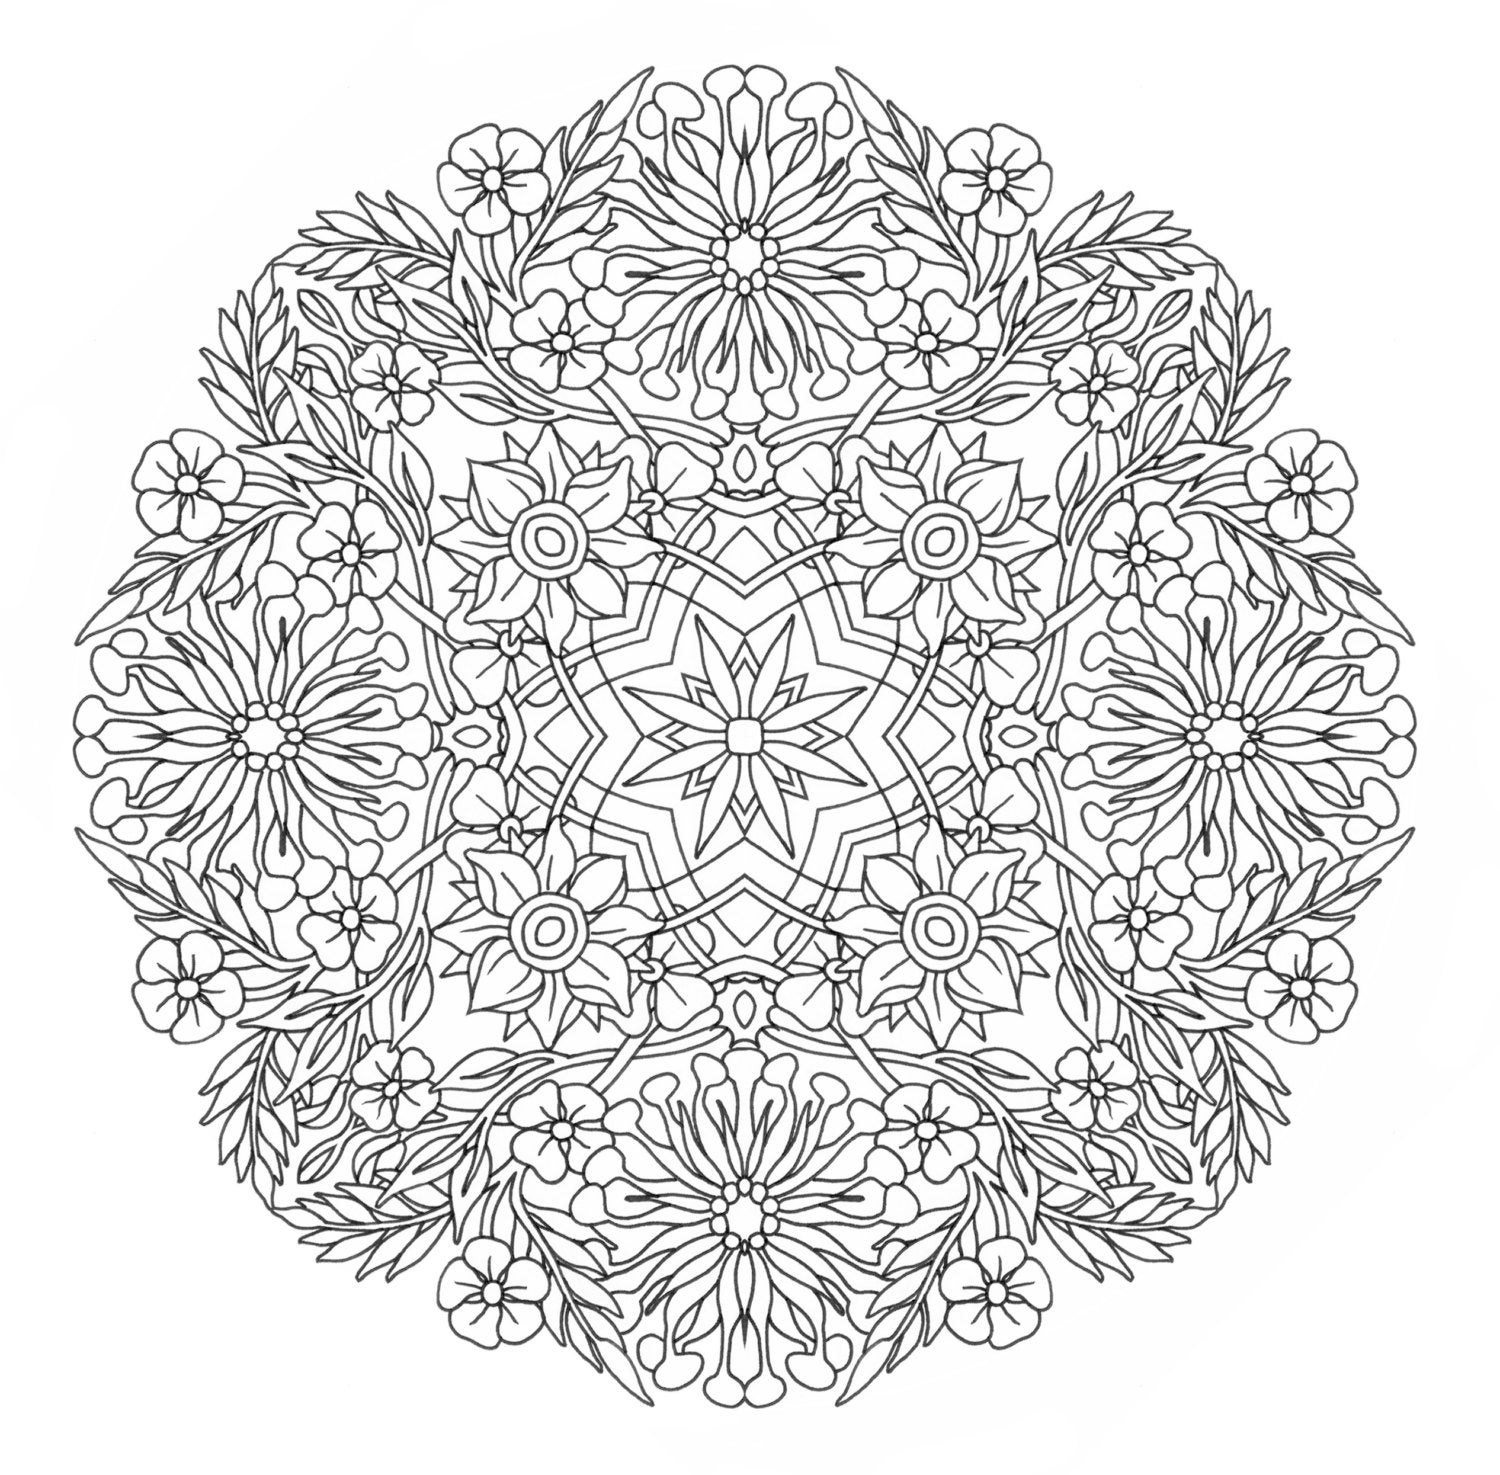 Complex Mandala Coloring Pages Printable
 Printable Coloring Page Honey Suckle Mandala by emerlyearts